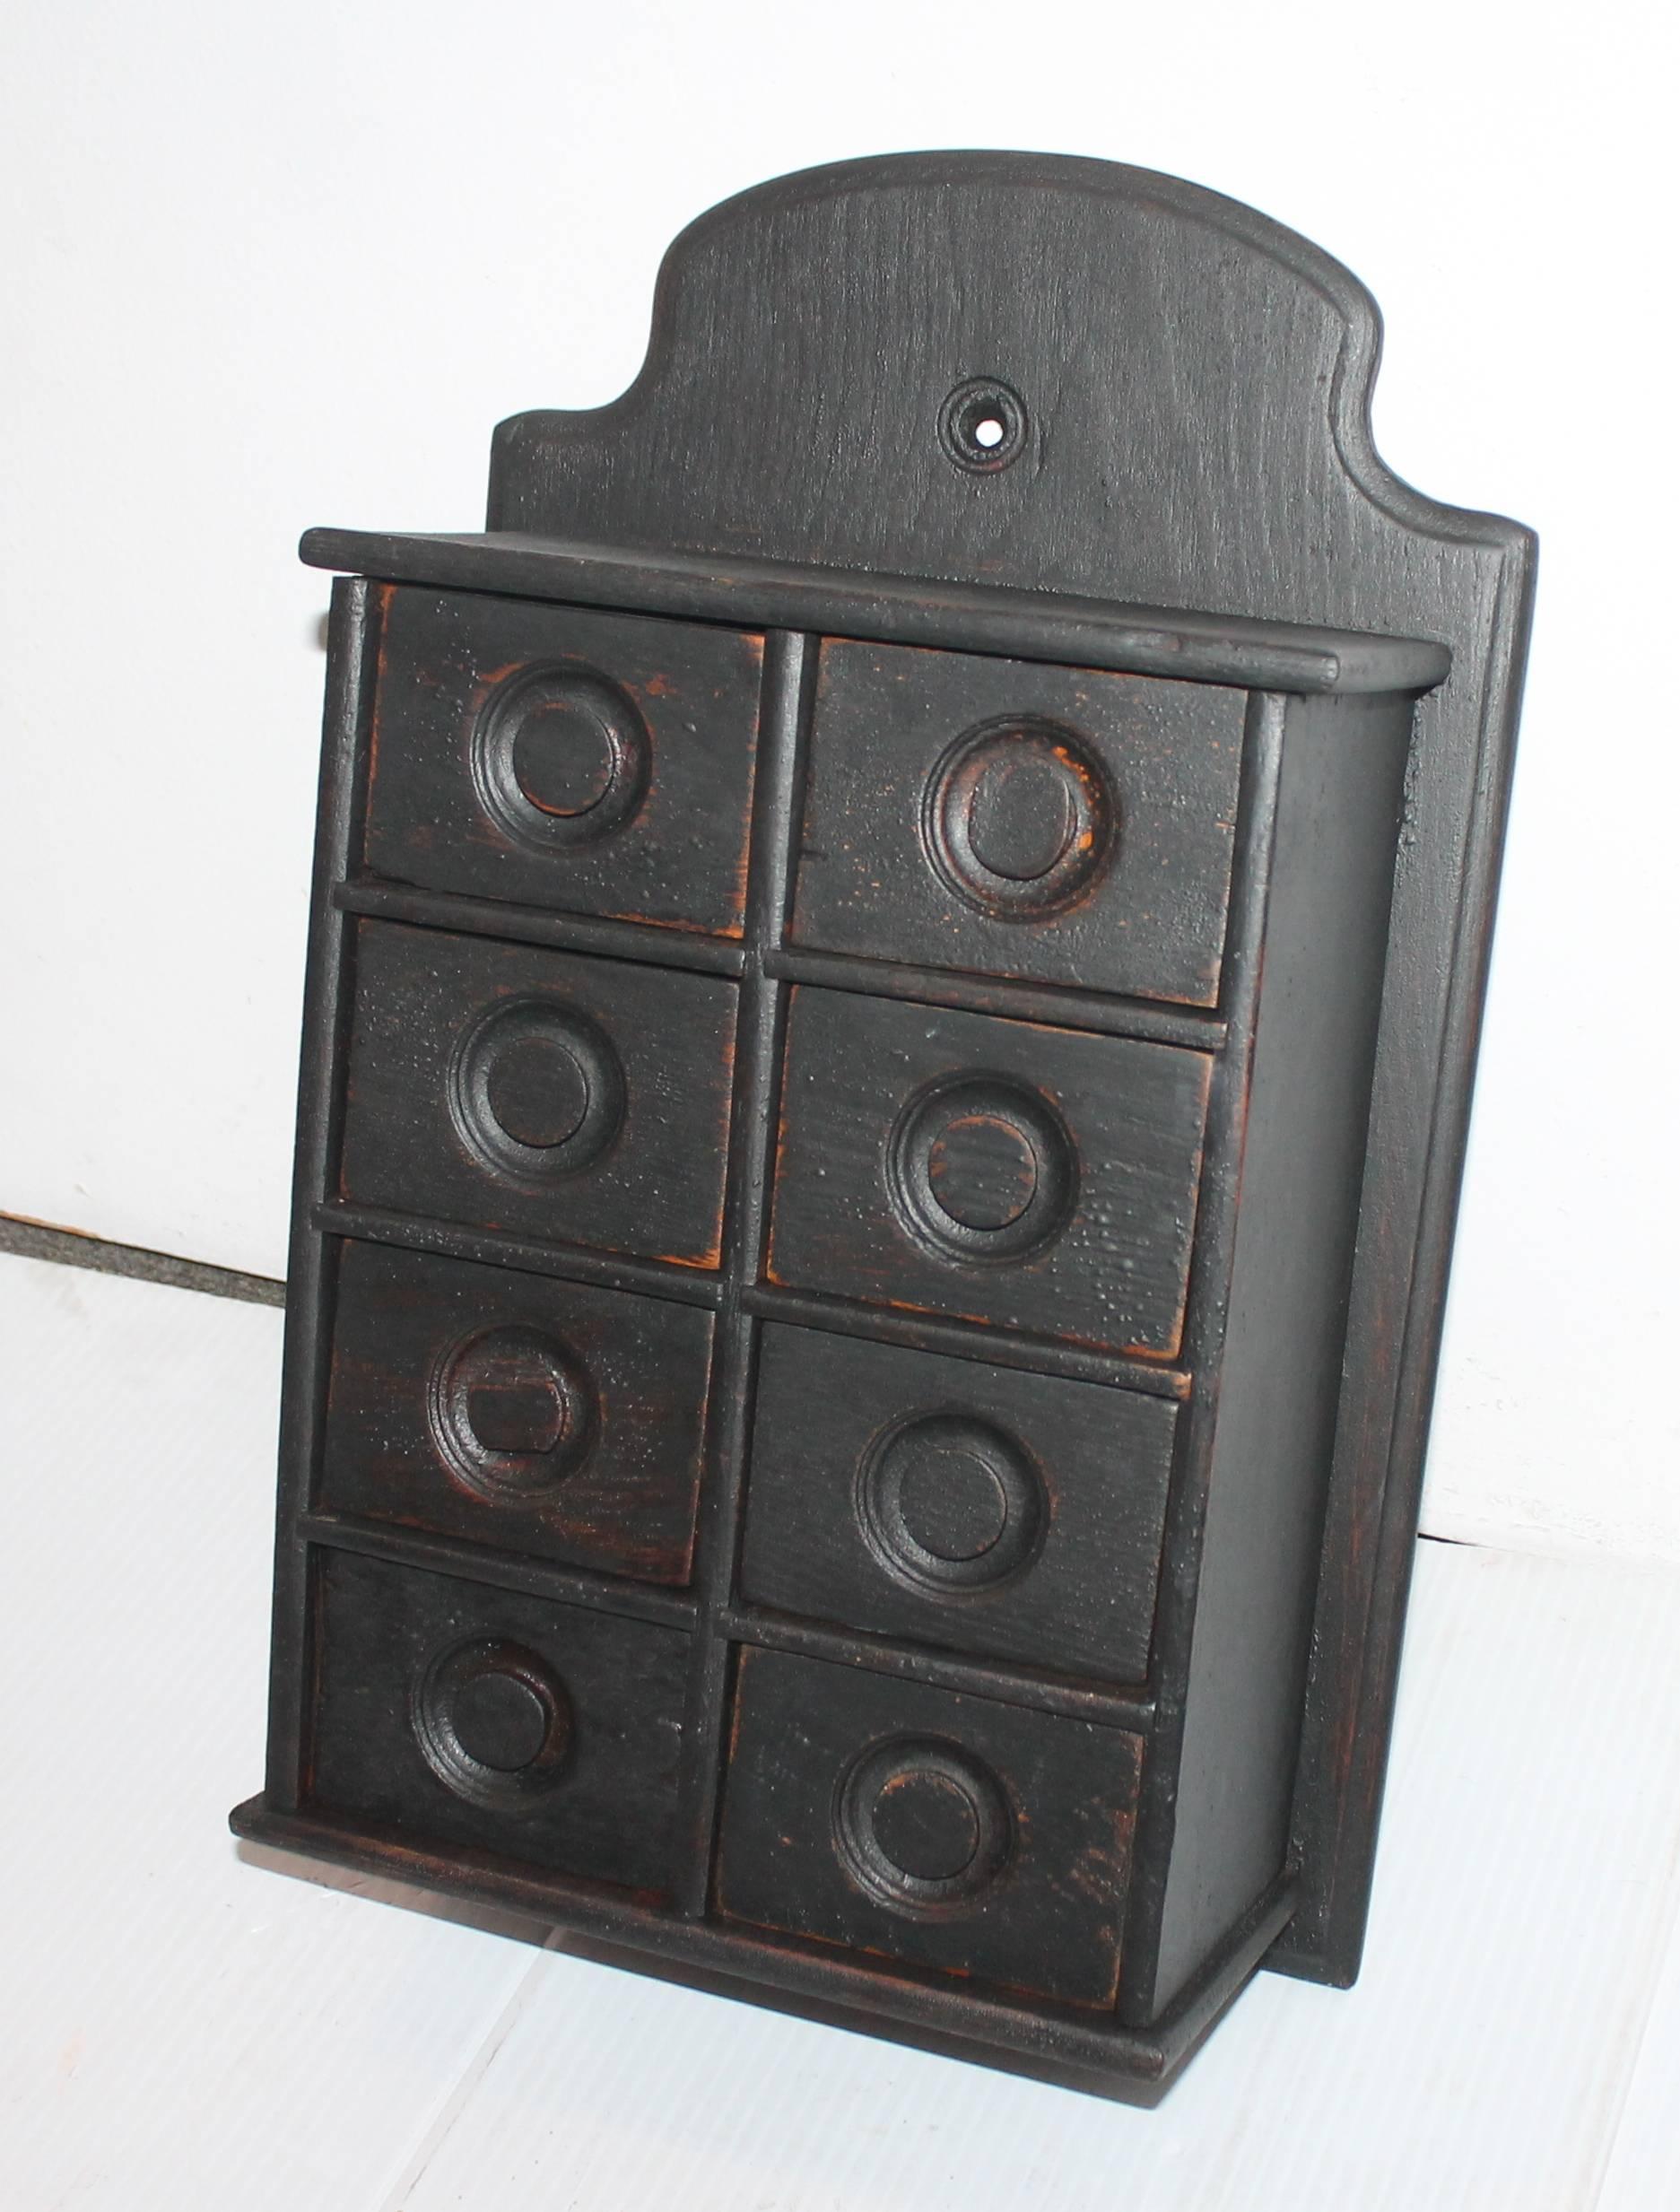 19th century black painted spice box. This spice box was found in Pennsylvania.